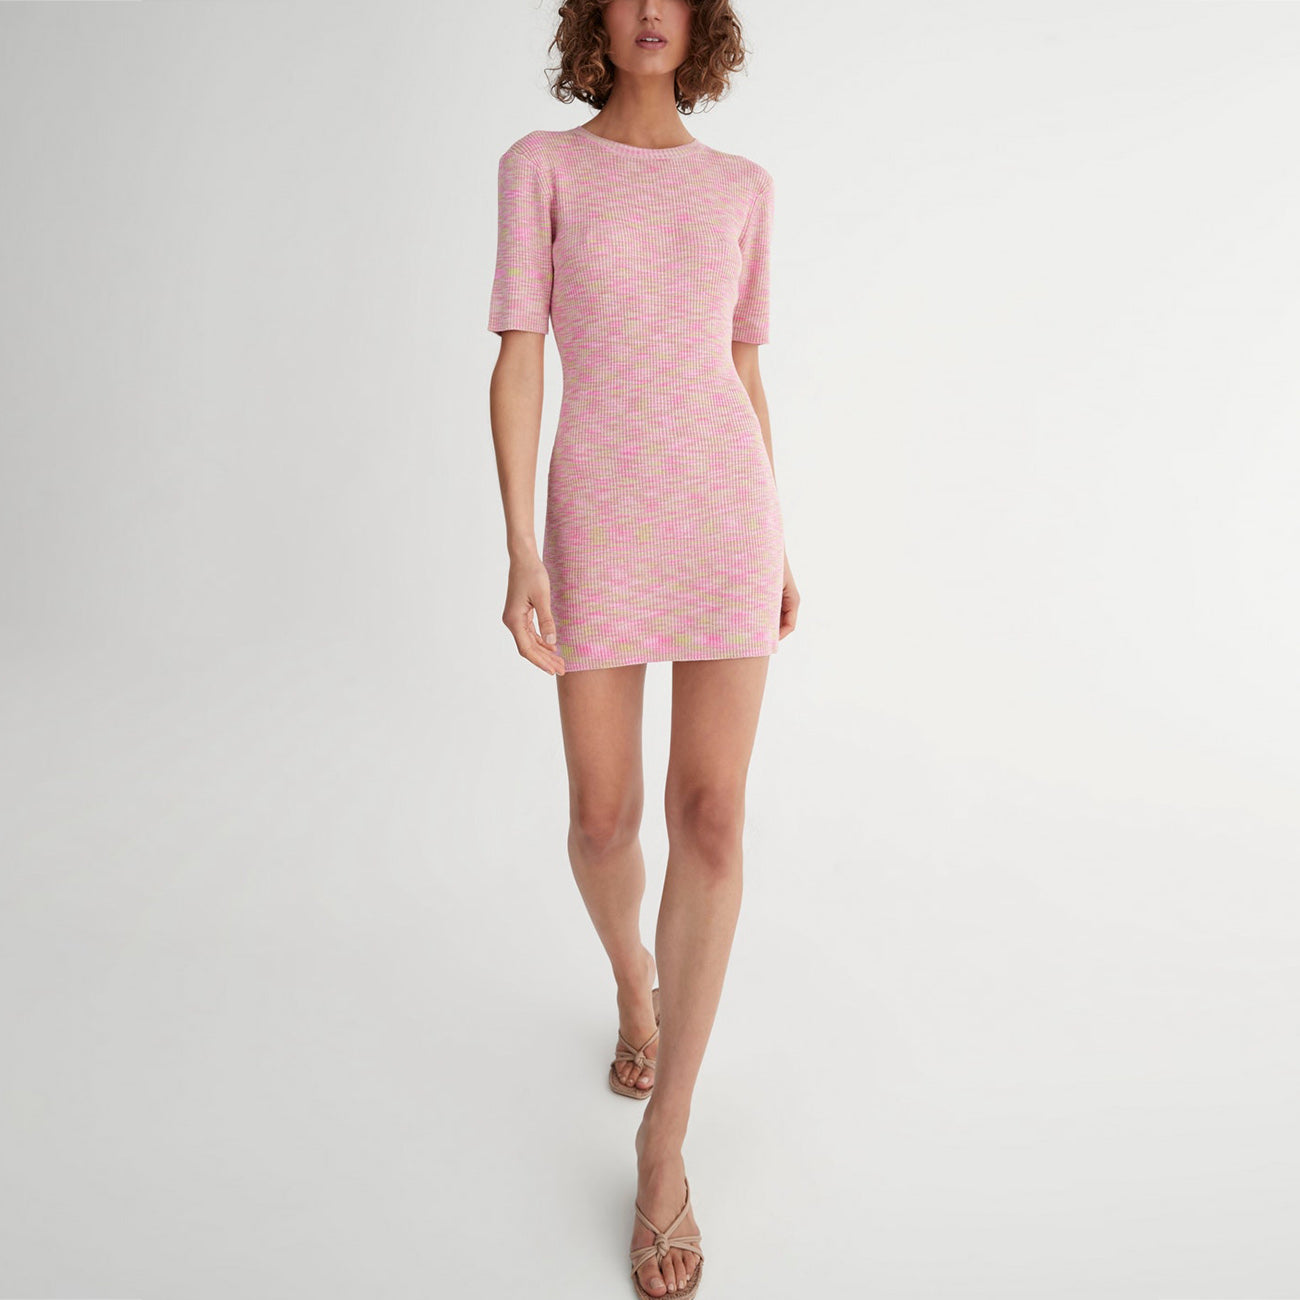 Hurley Dress - Electric Pink